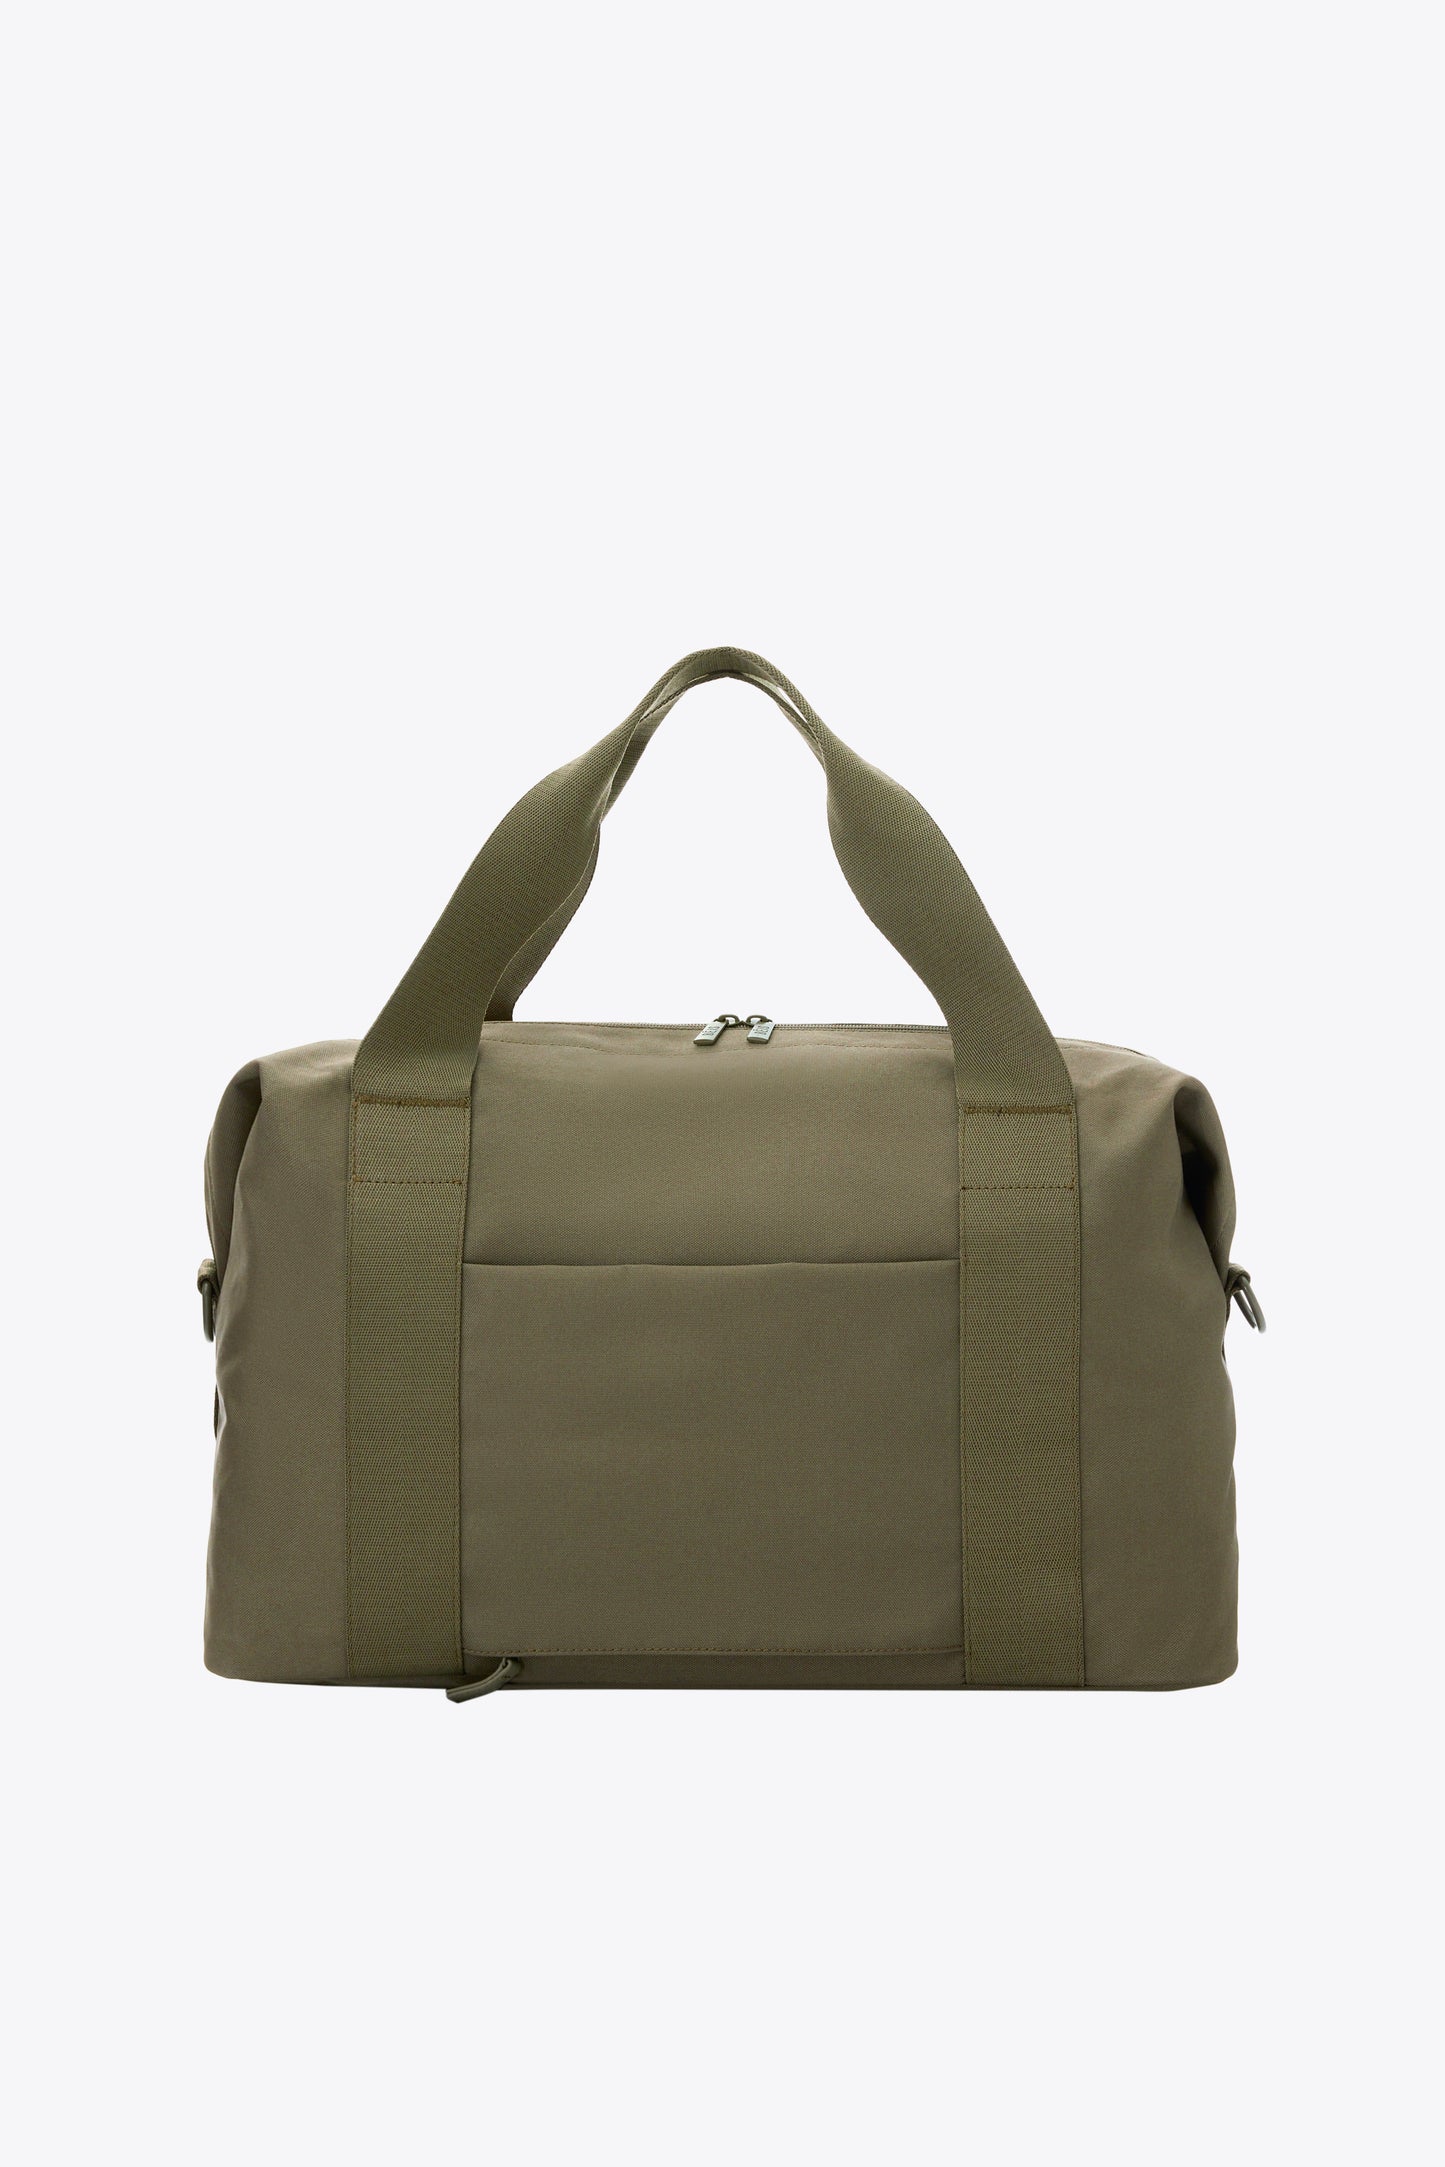 The BÉISics Duffle in Olive